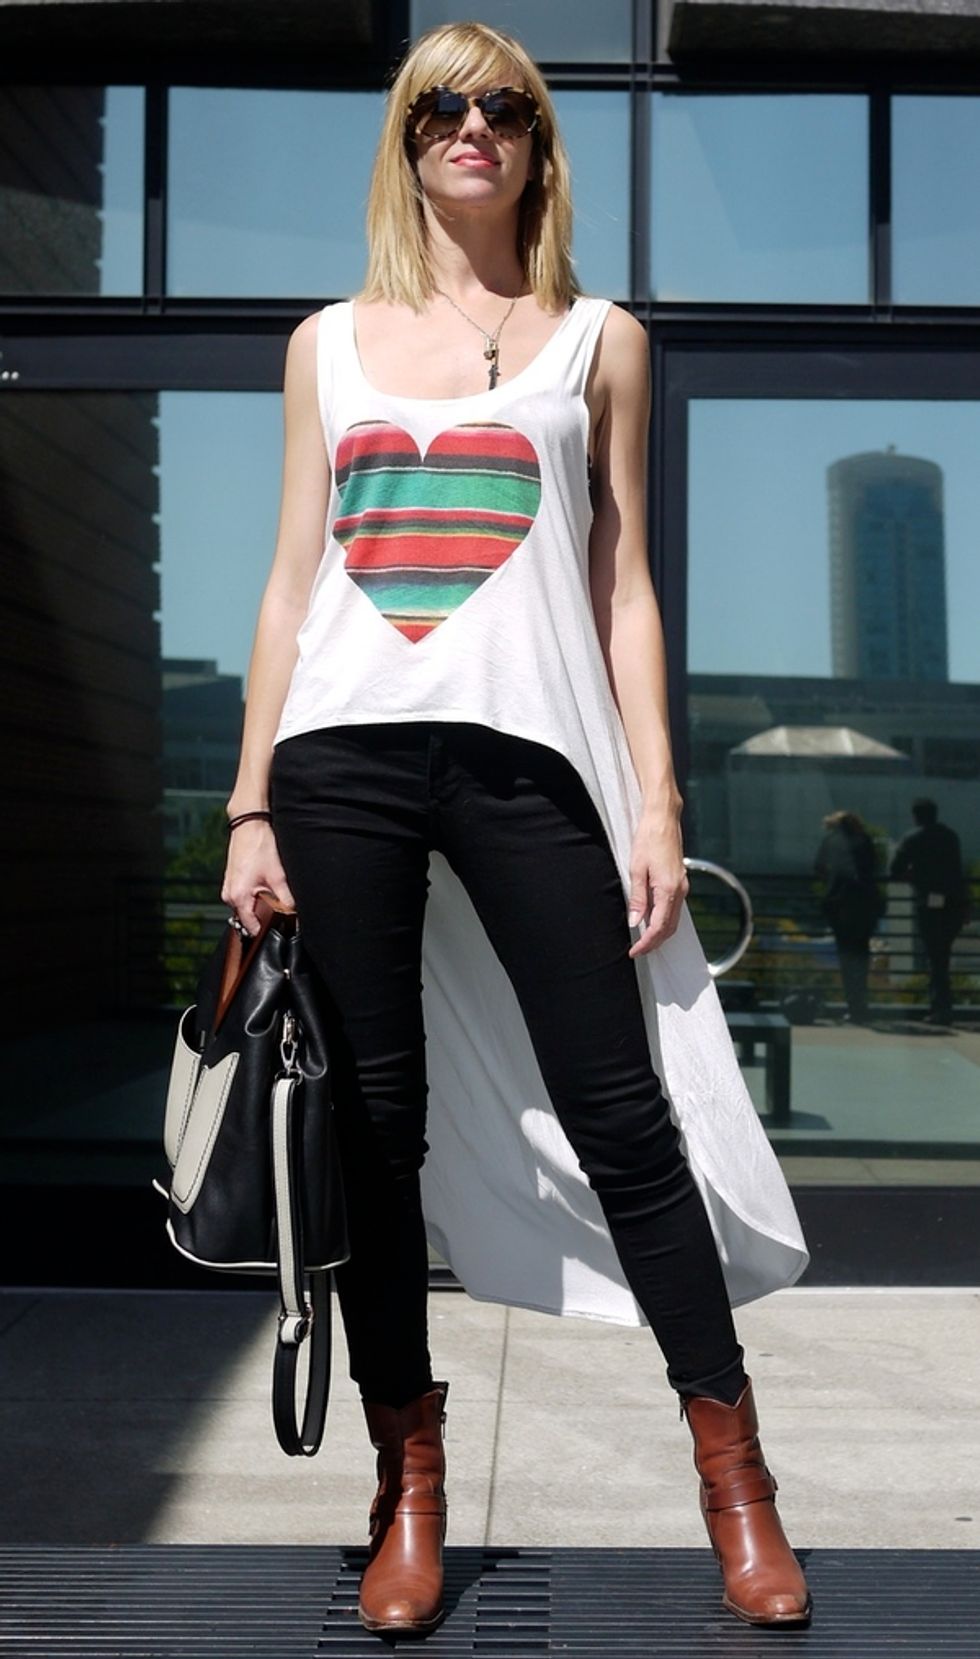 Street Style Report: A  High-low Top + Geometric Bag, at SFMOMA